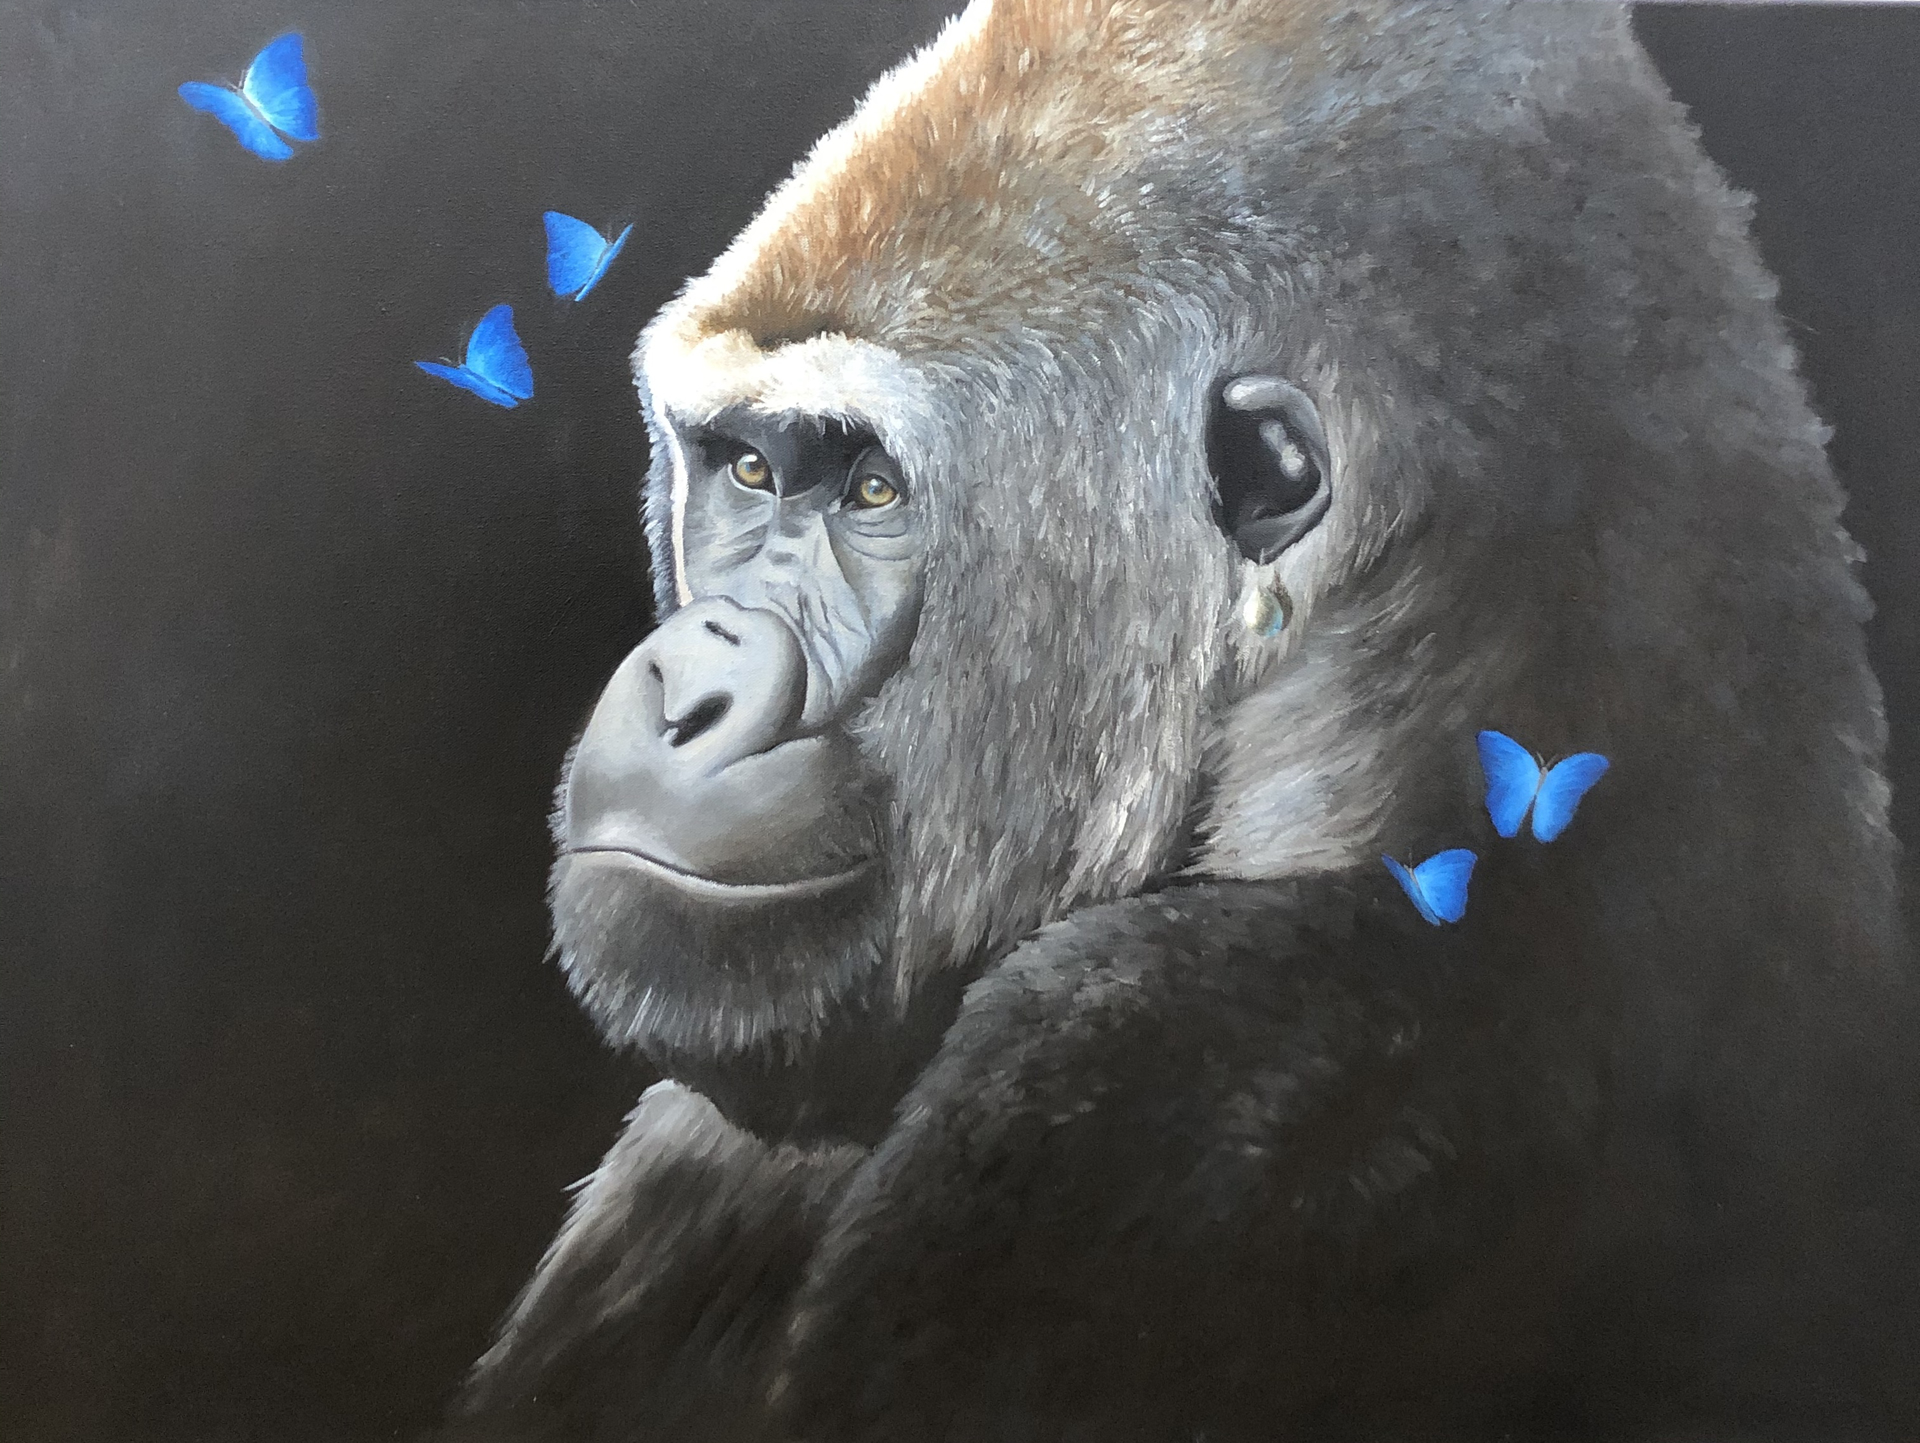 Gorilla with a Pearl Earring  by Adam Thomas